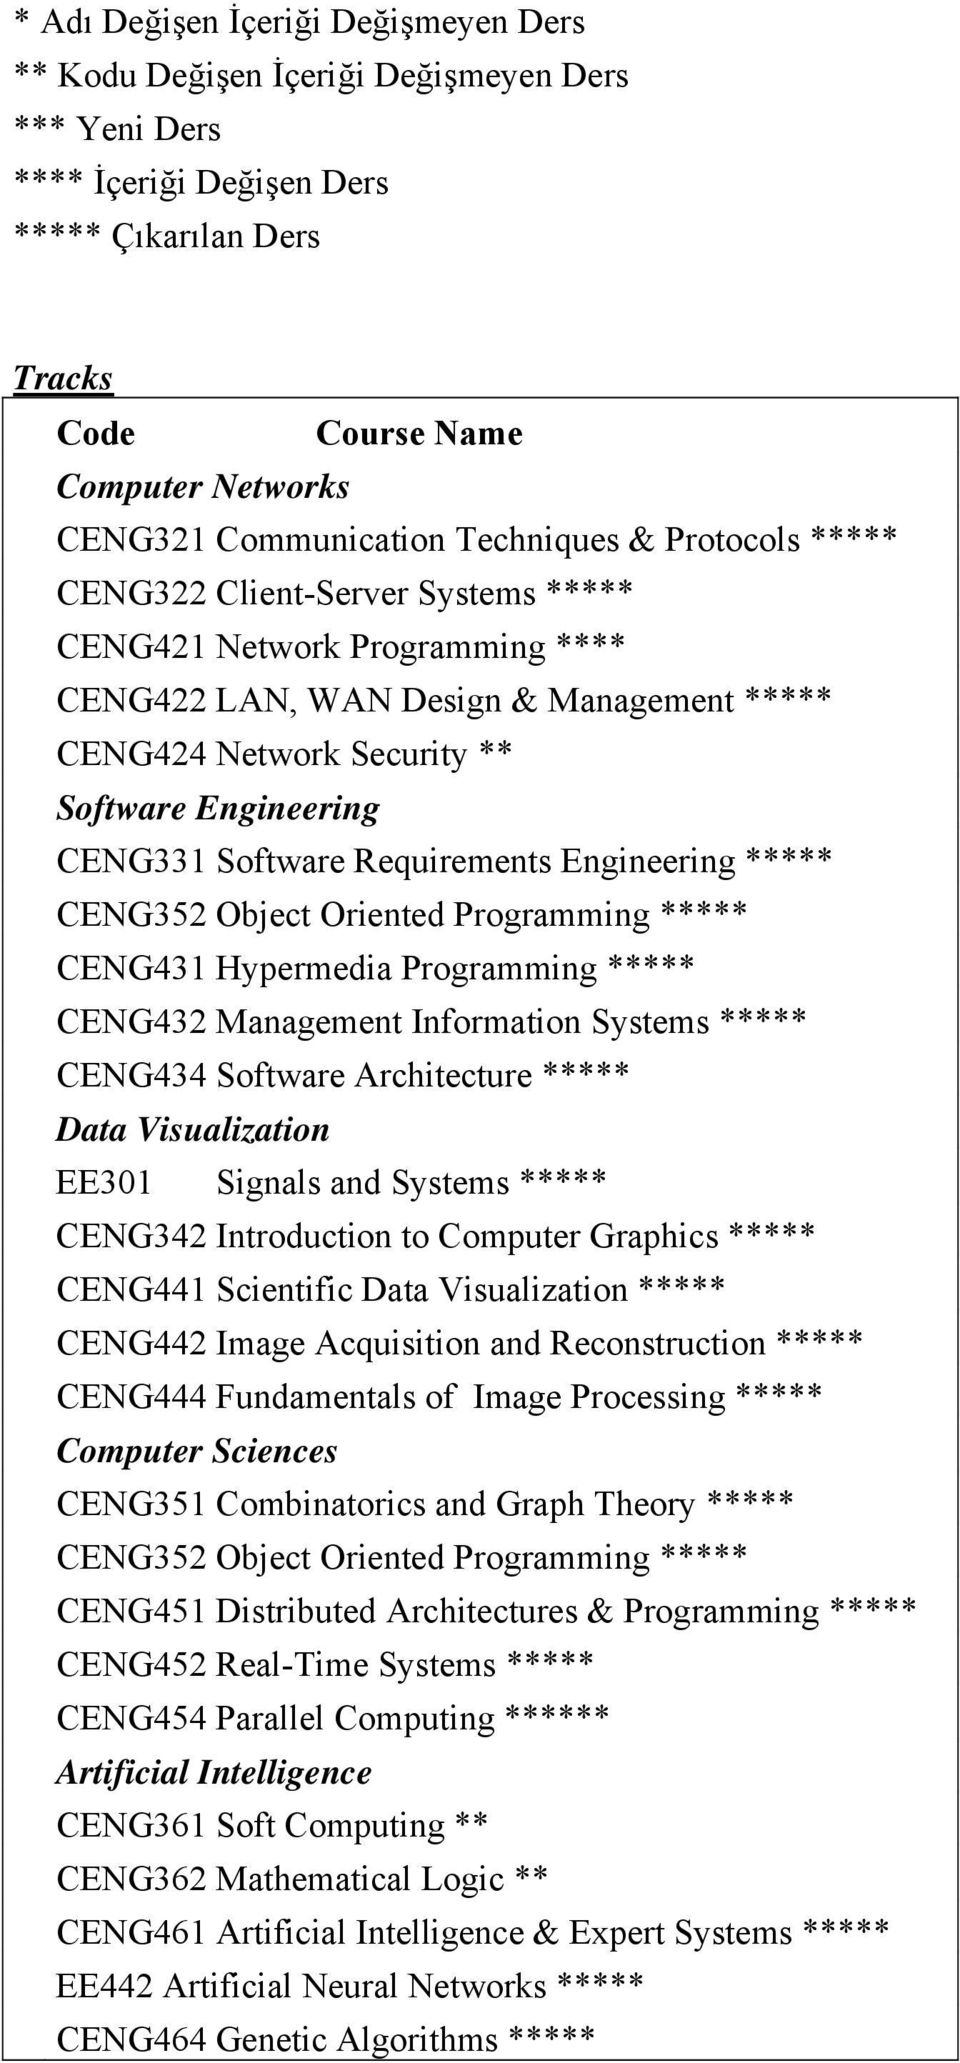 Engineering CENG331 Software Requirements Engineering ***** CENG352 Object Oriented Programming ***** CENG431 Hypermedia Programming ***** CENG432 Management Information Systems ***** CENG434